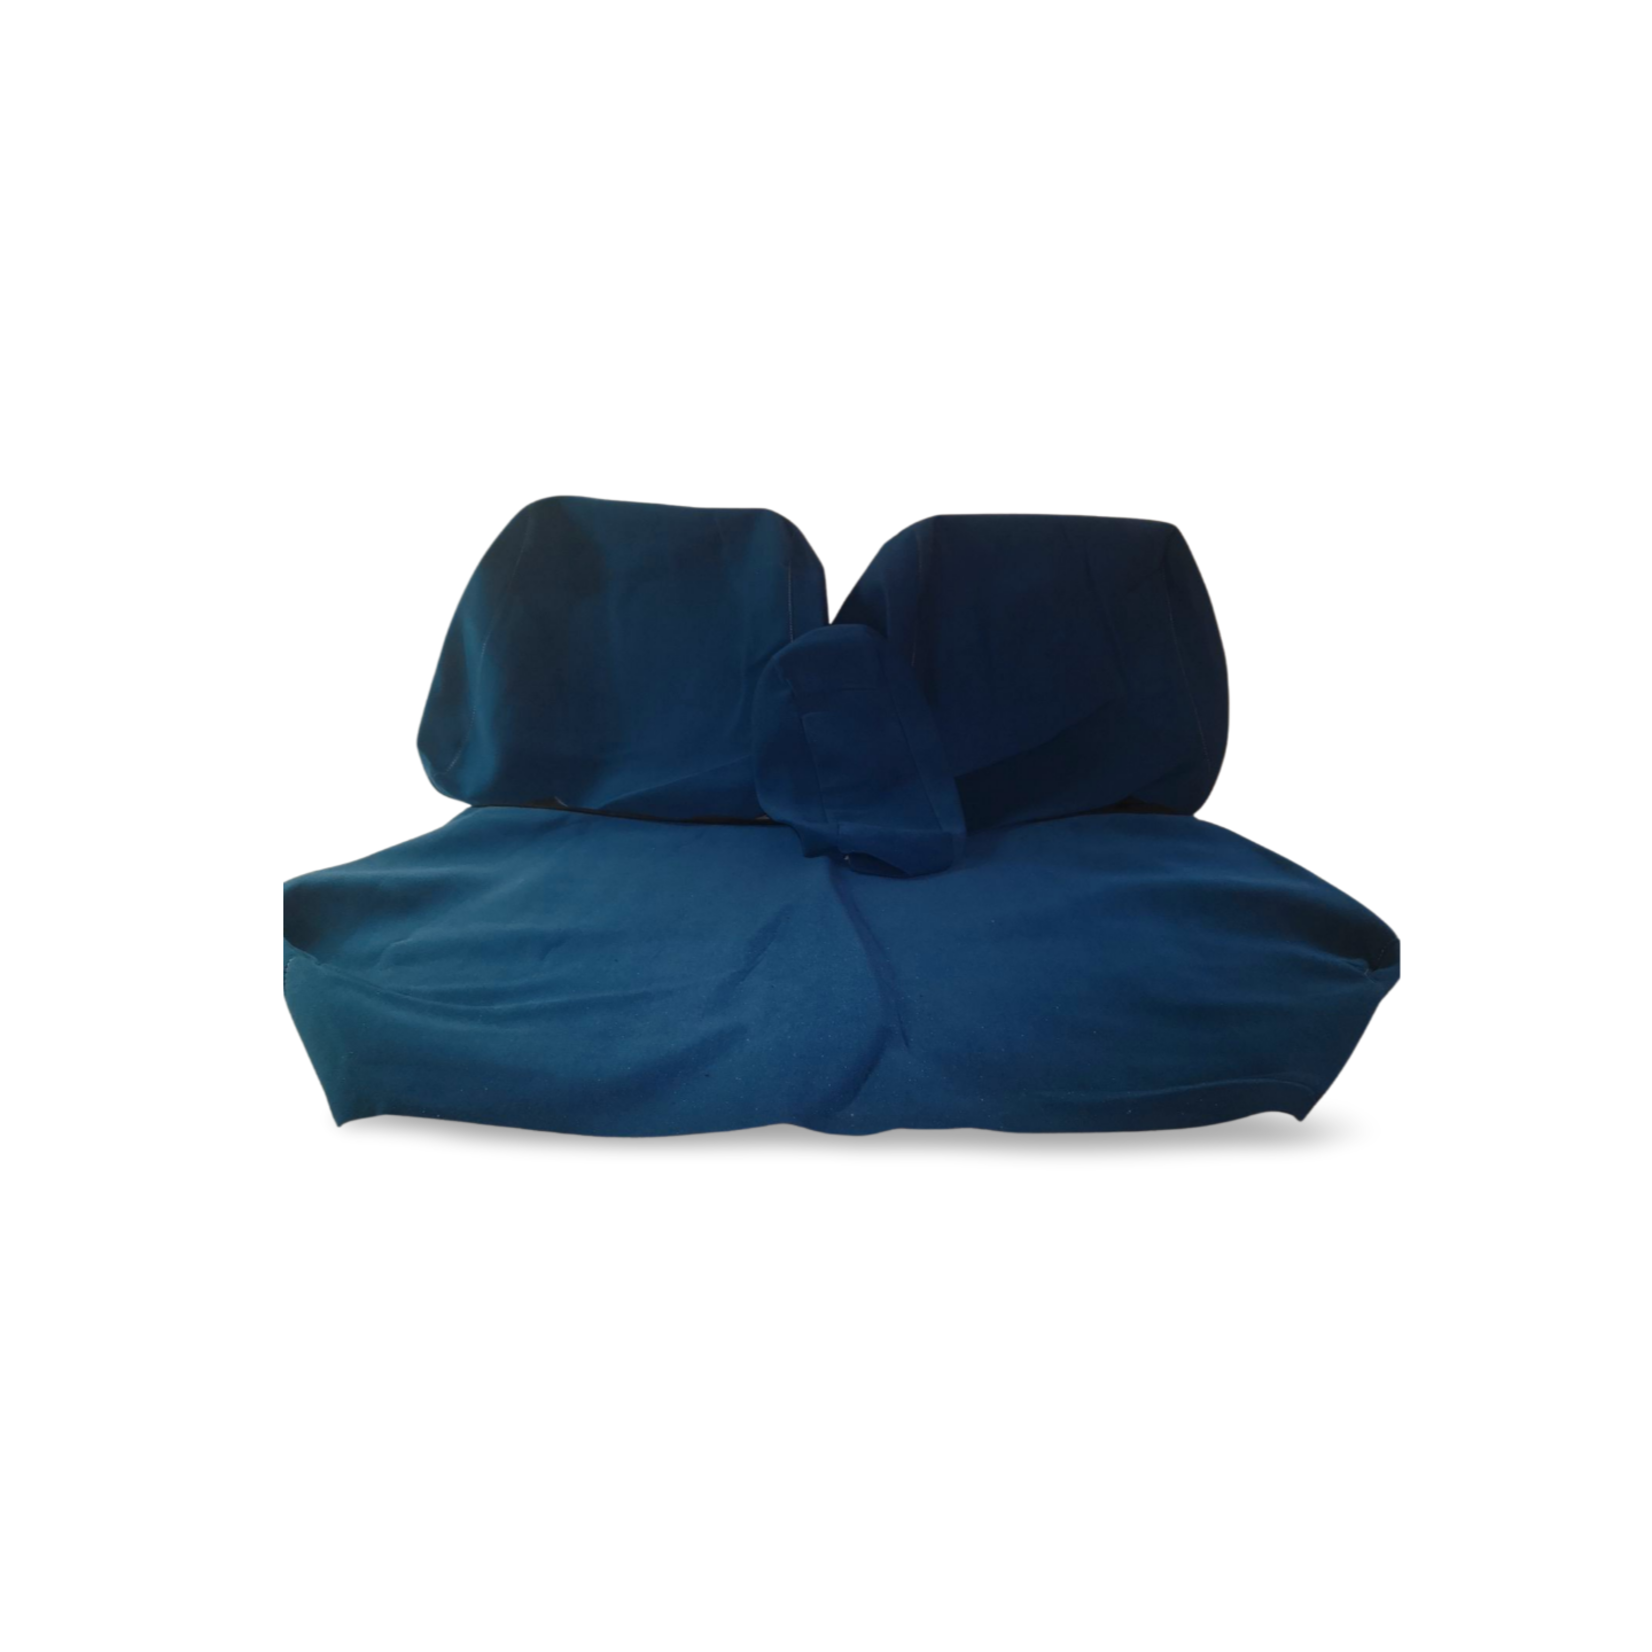 Upholstery set Jersey blue 63/74 (with armrest bench 20cm) non Pallas -07/62 Nr Org: Interior - Image 63/74